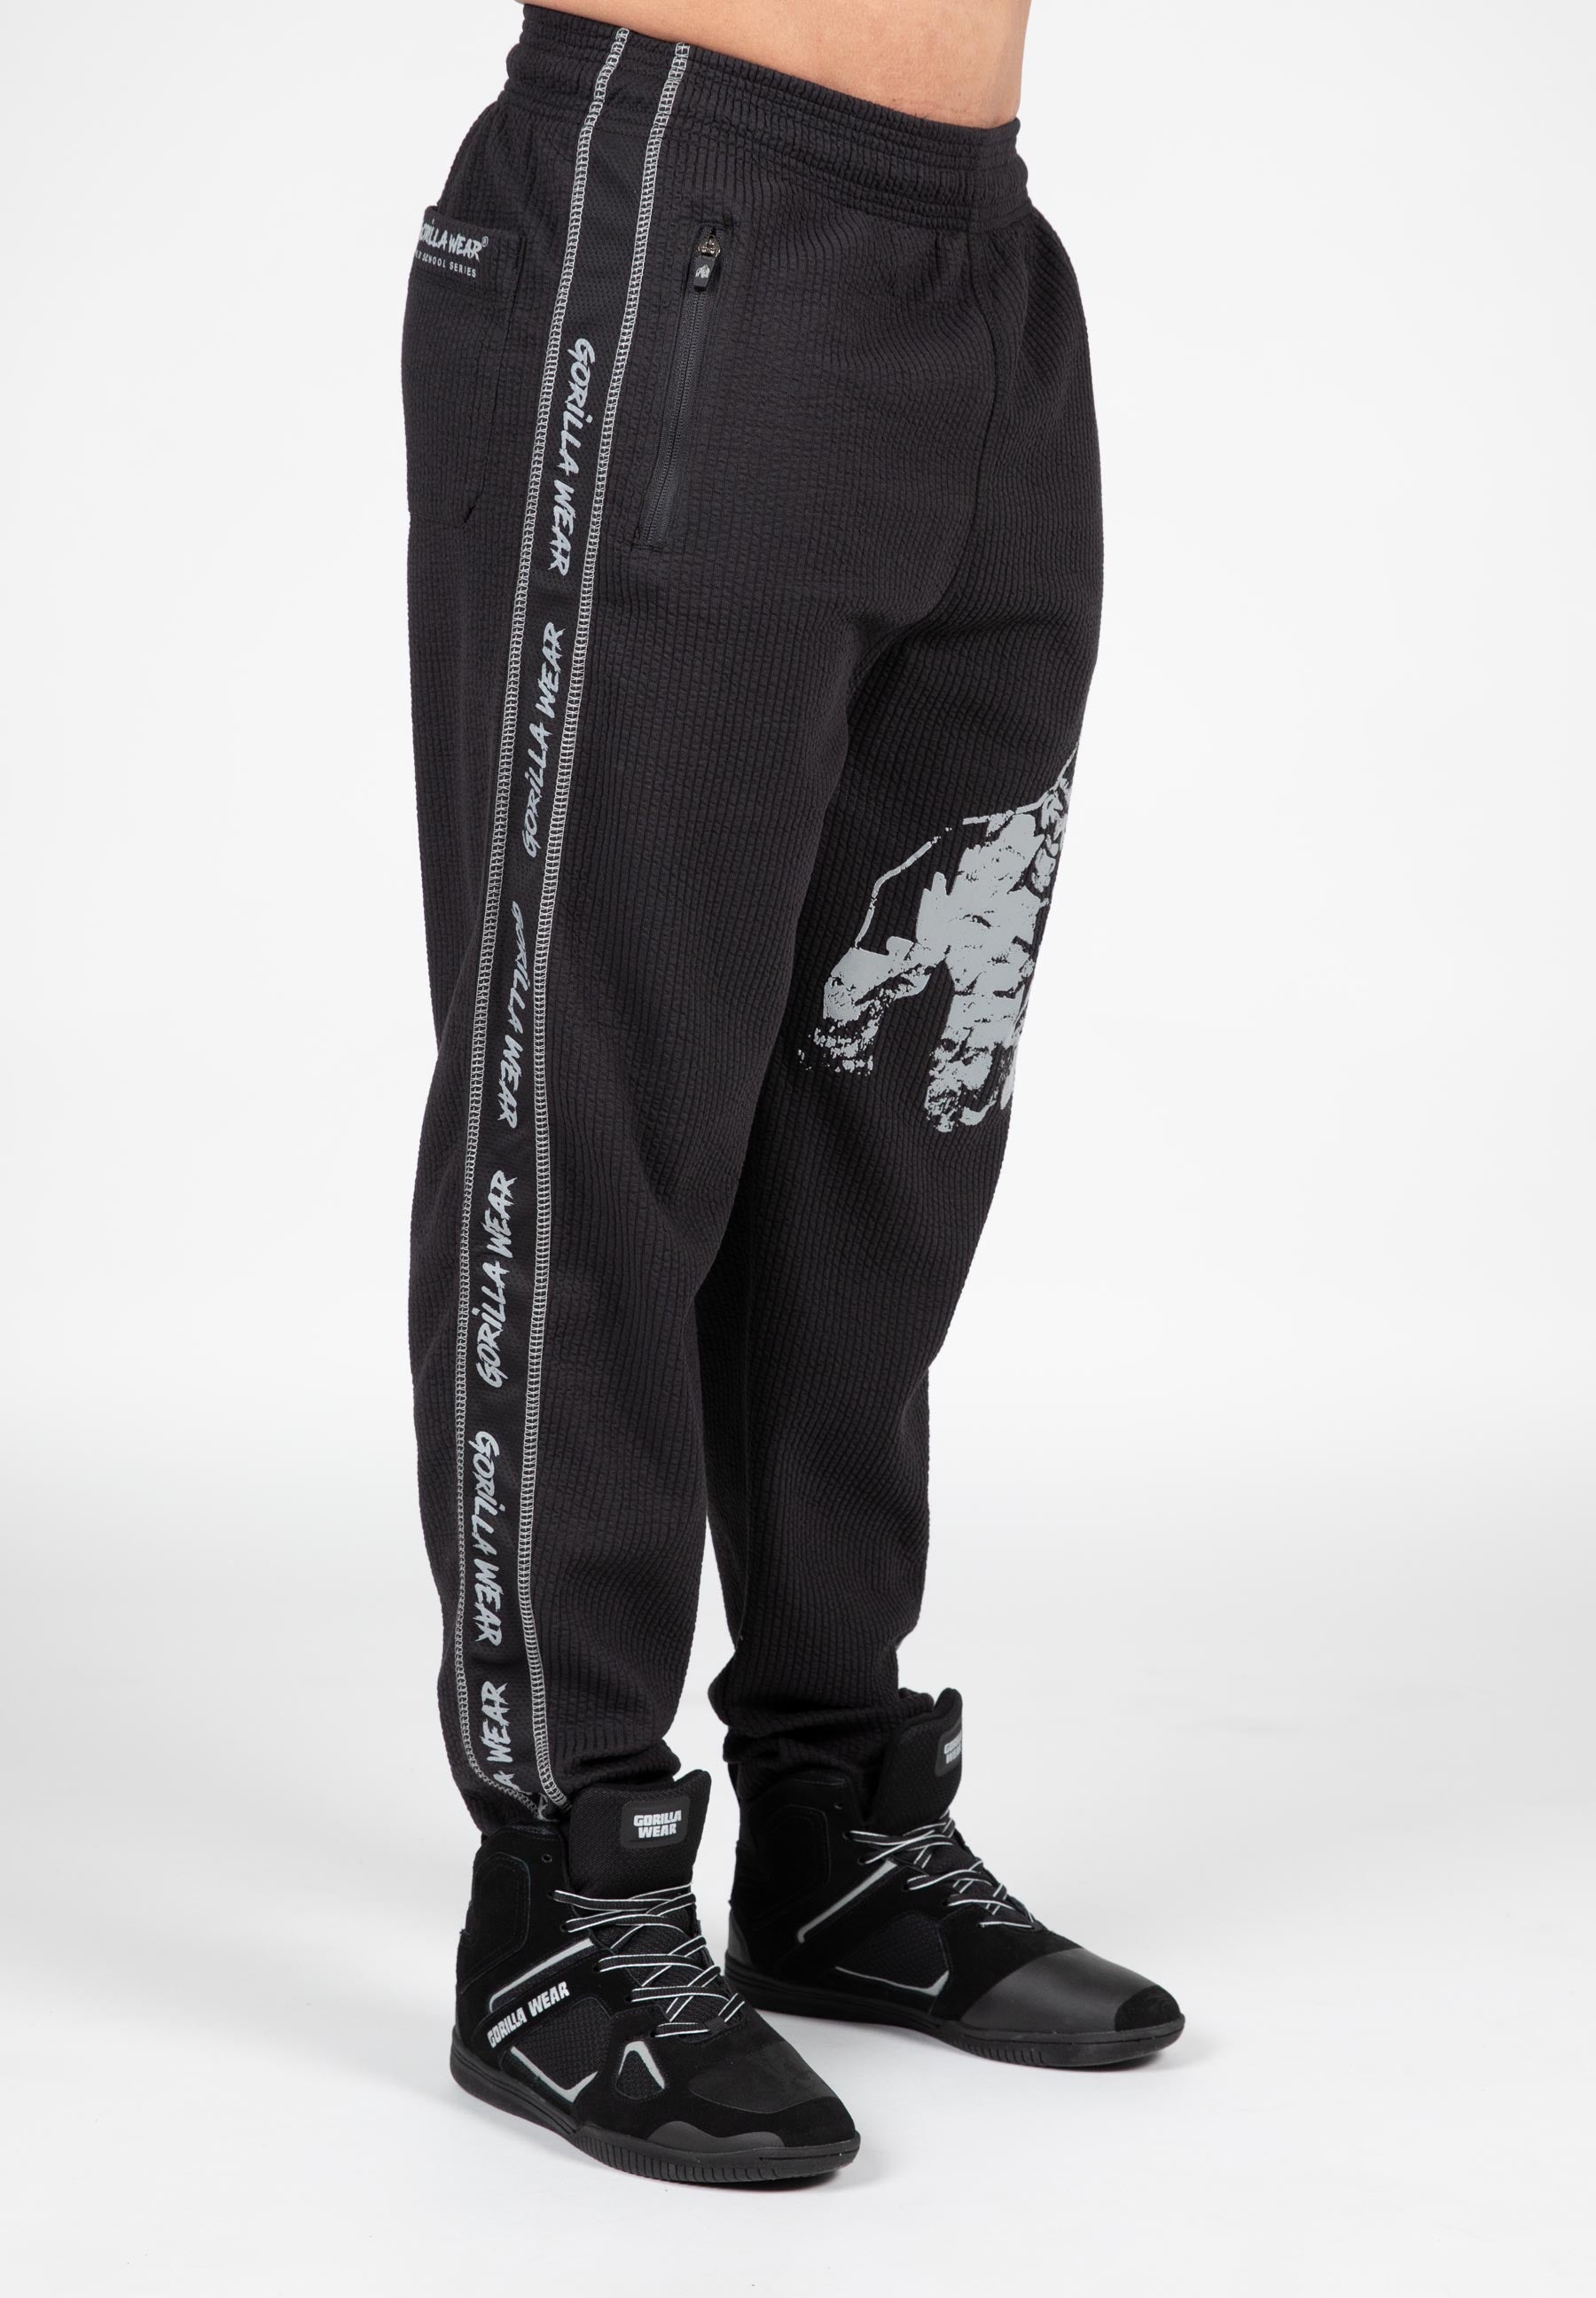 FEDTOSING Mens Joggers Sweatpants Lightweight Trousers Tracksuit